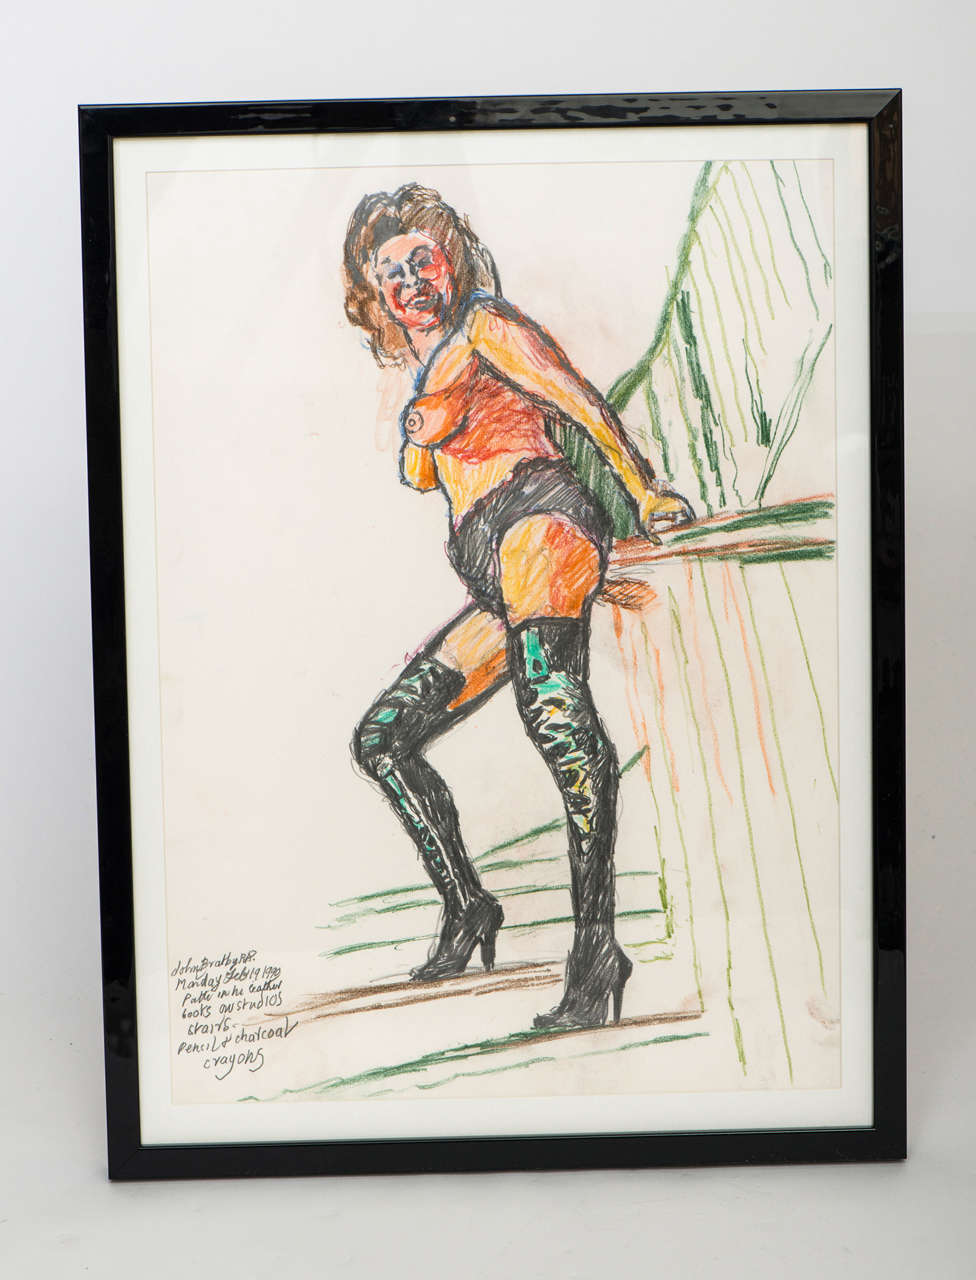 John Bratby pencil and crayon drawing “Patty in Leather Boots”, England 1990 For Sale 3